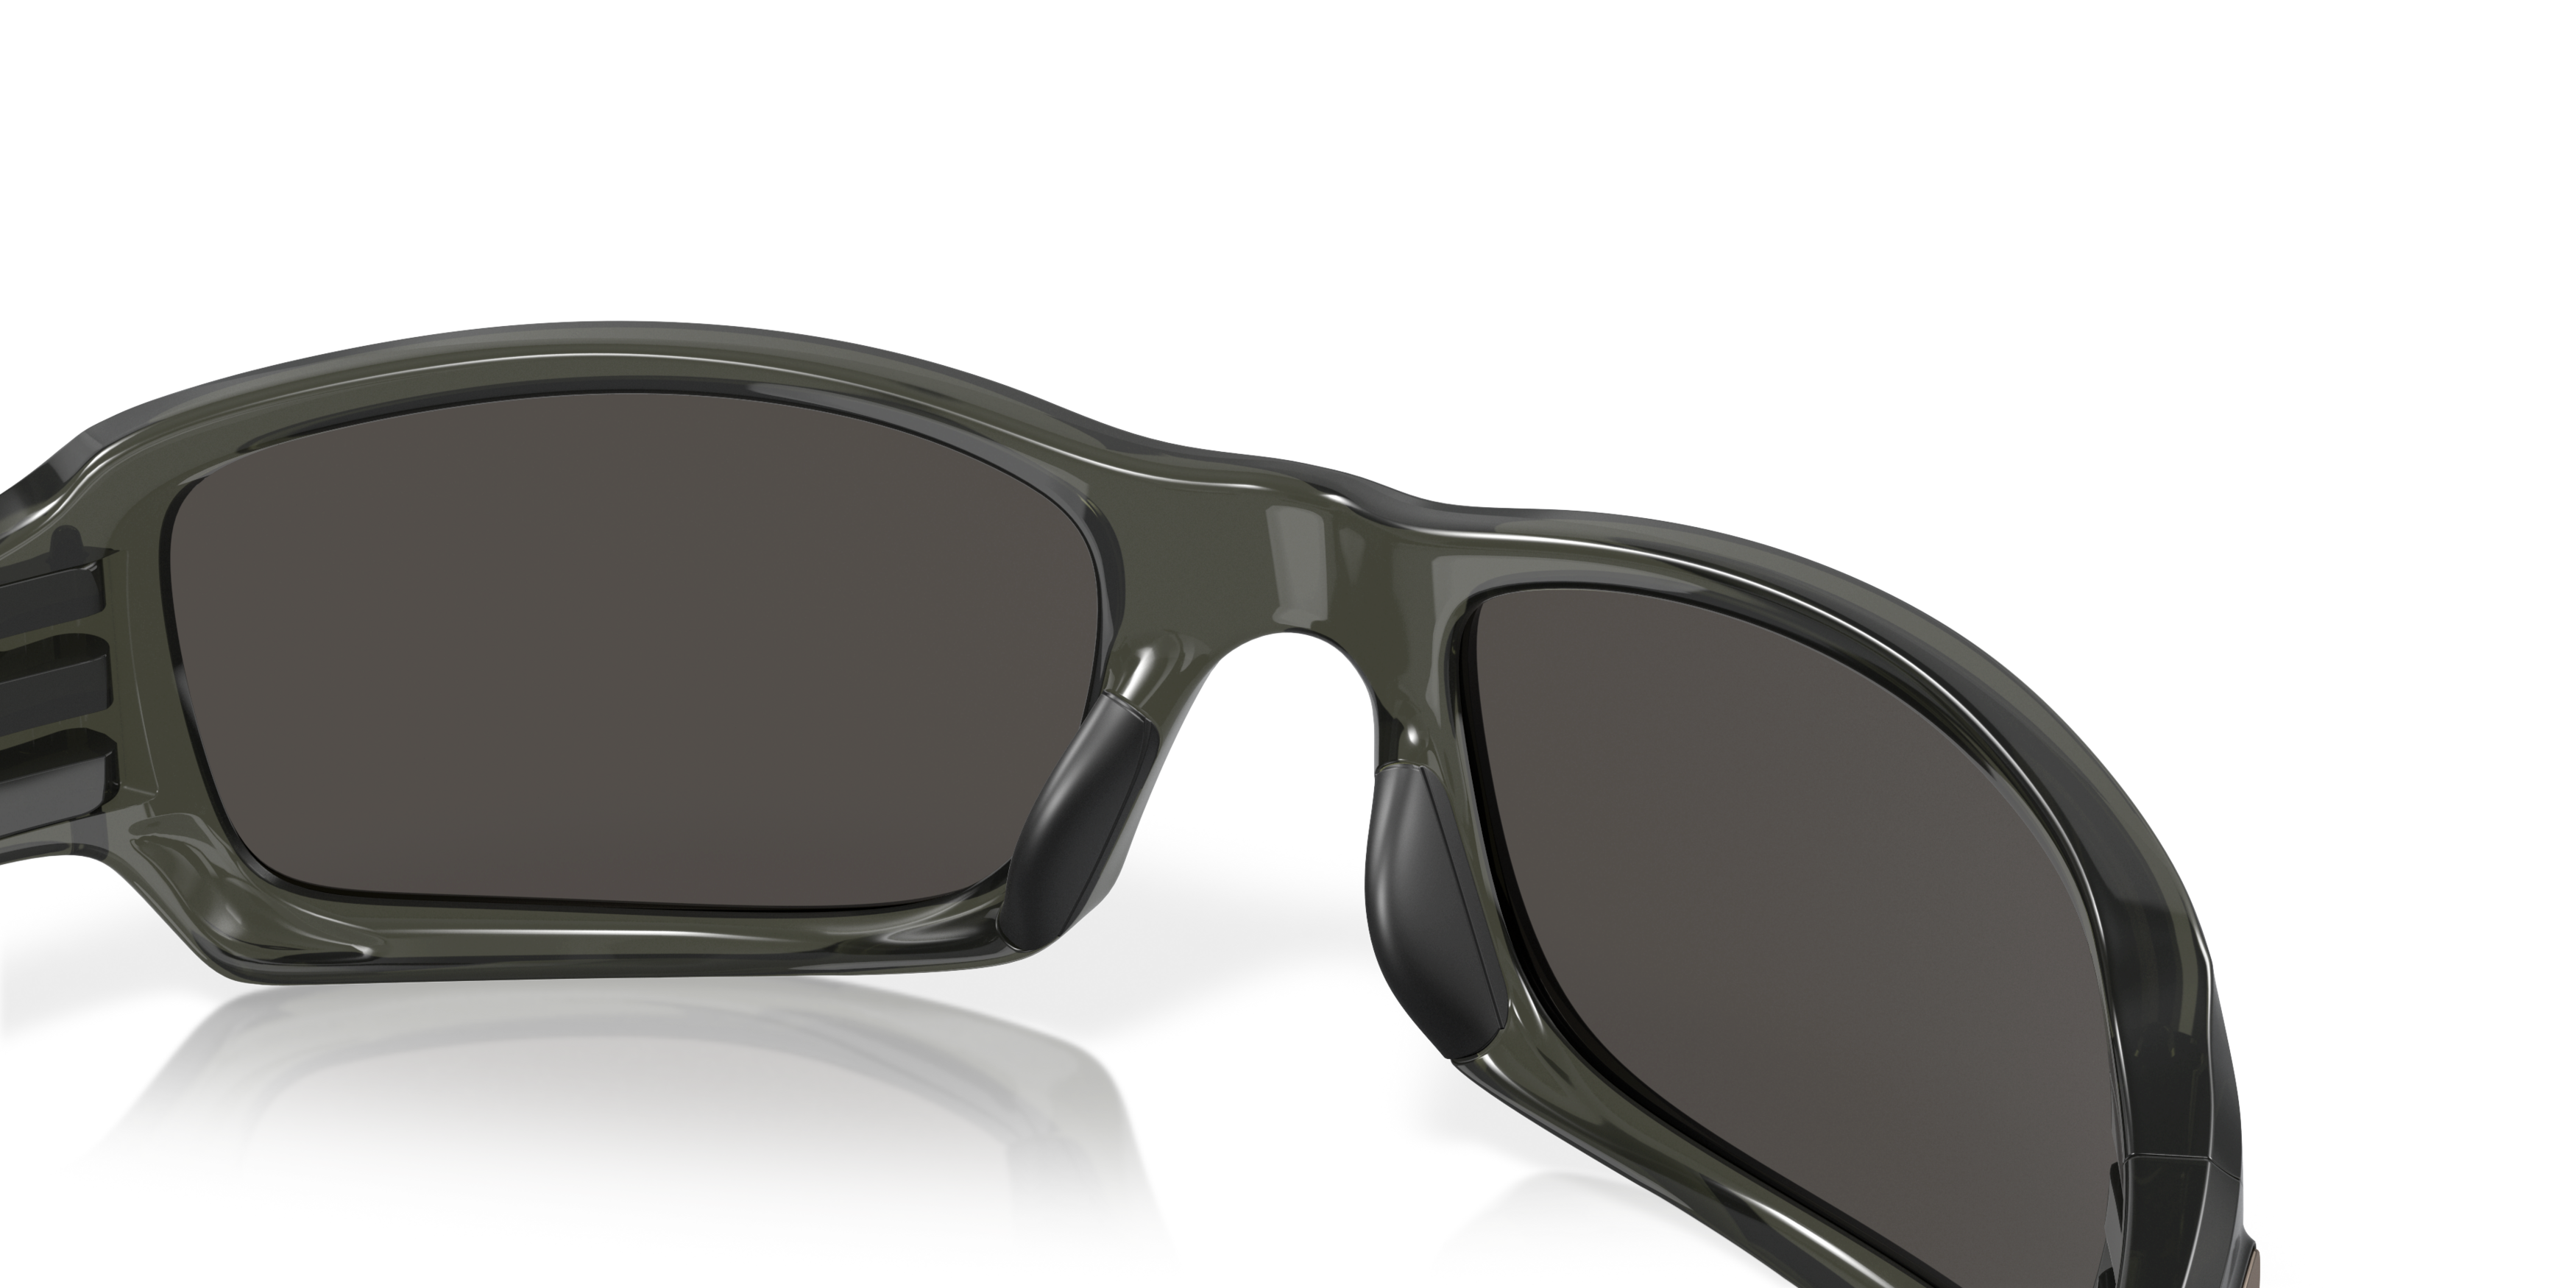 [products.image.detail03] Oakley Fives OO9238 923805